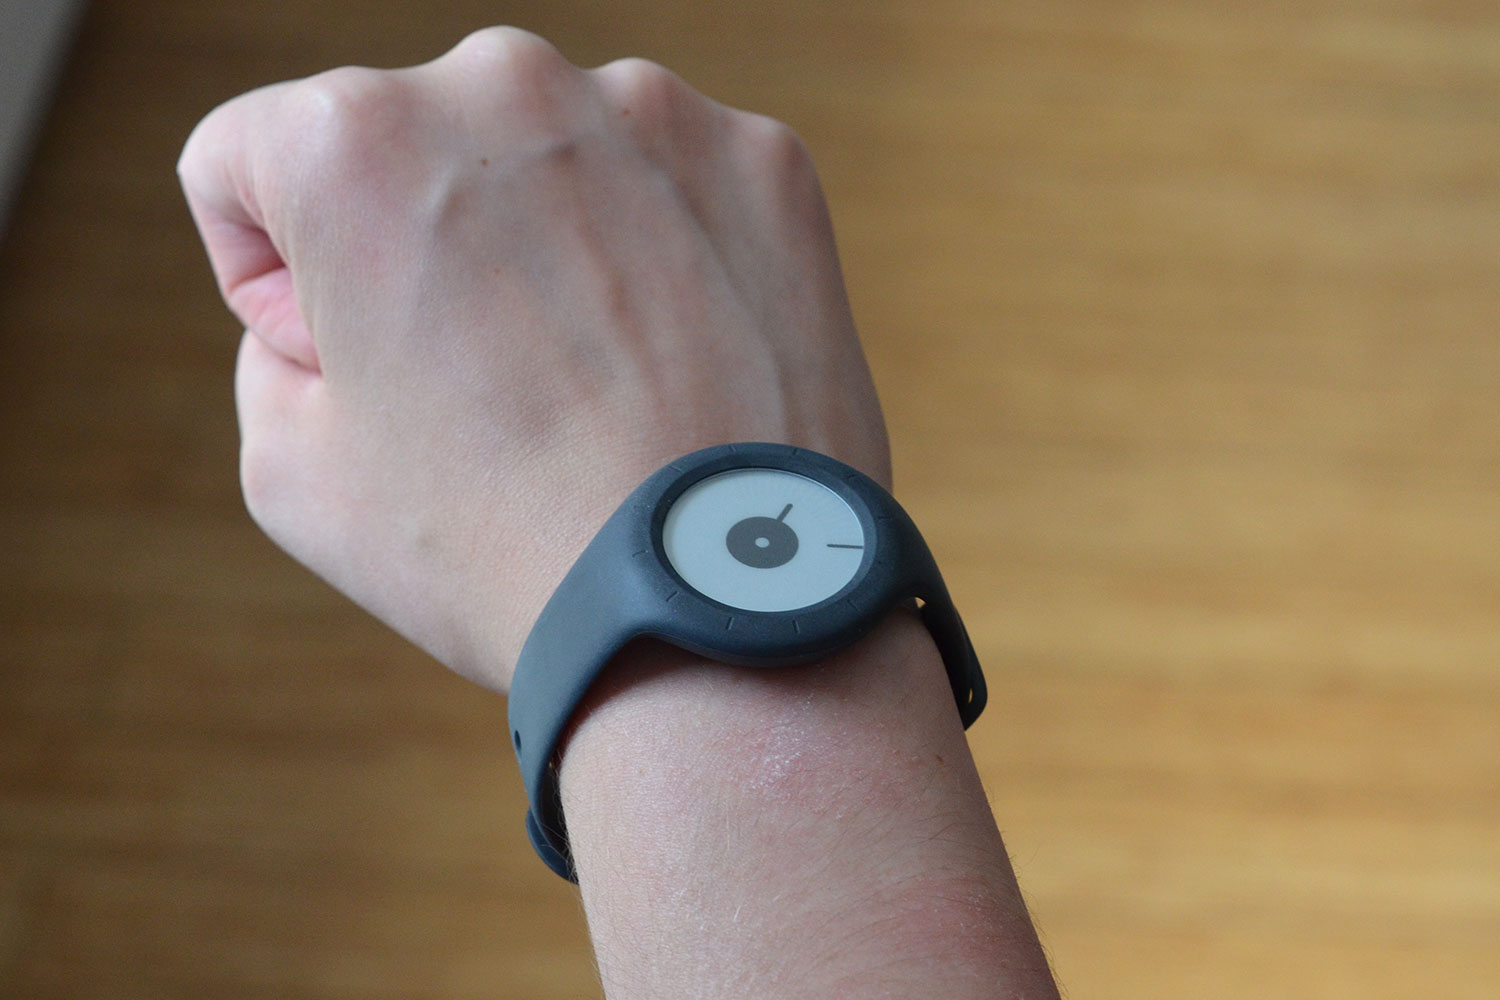 Nokia - Watch Nokia's day 1 in review video for an... | Facebook